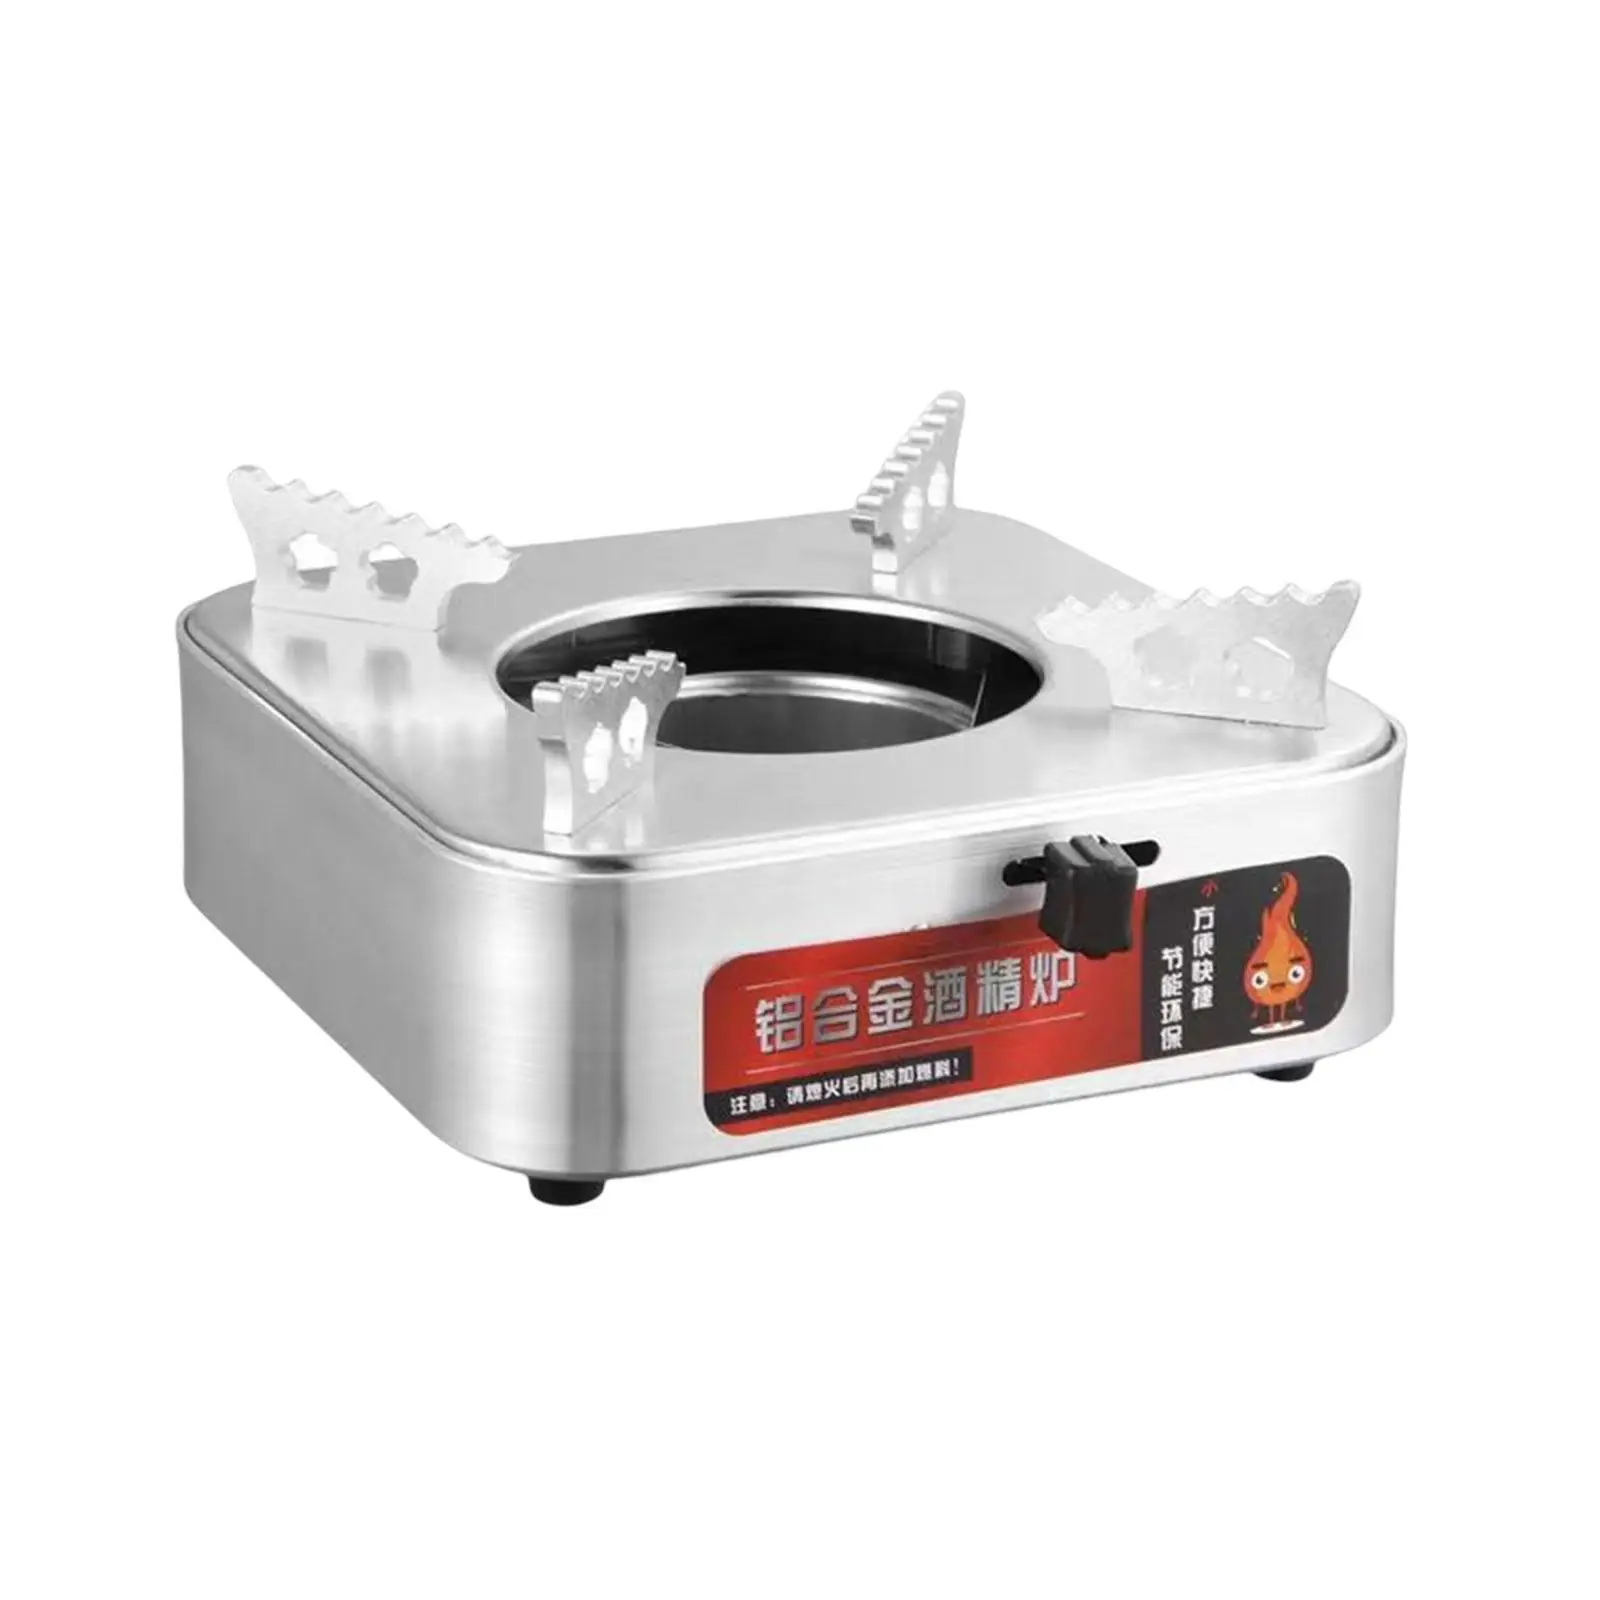 Compact Alcohol Stove Alcohol Burner Stove Adjustable for Household Outdoor